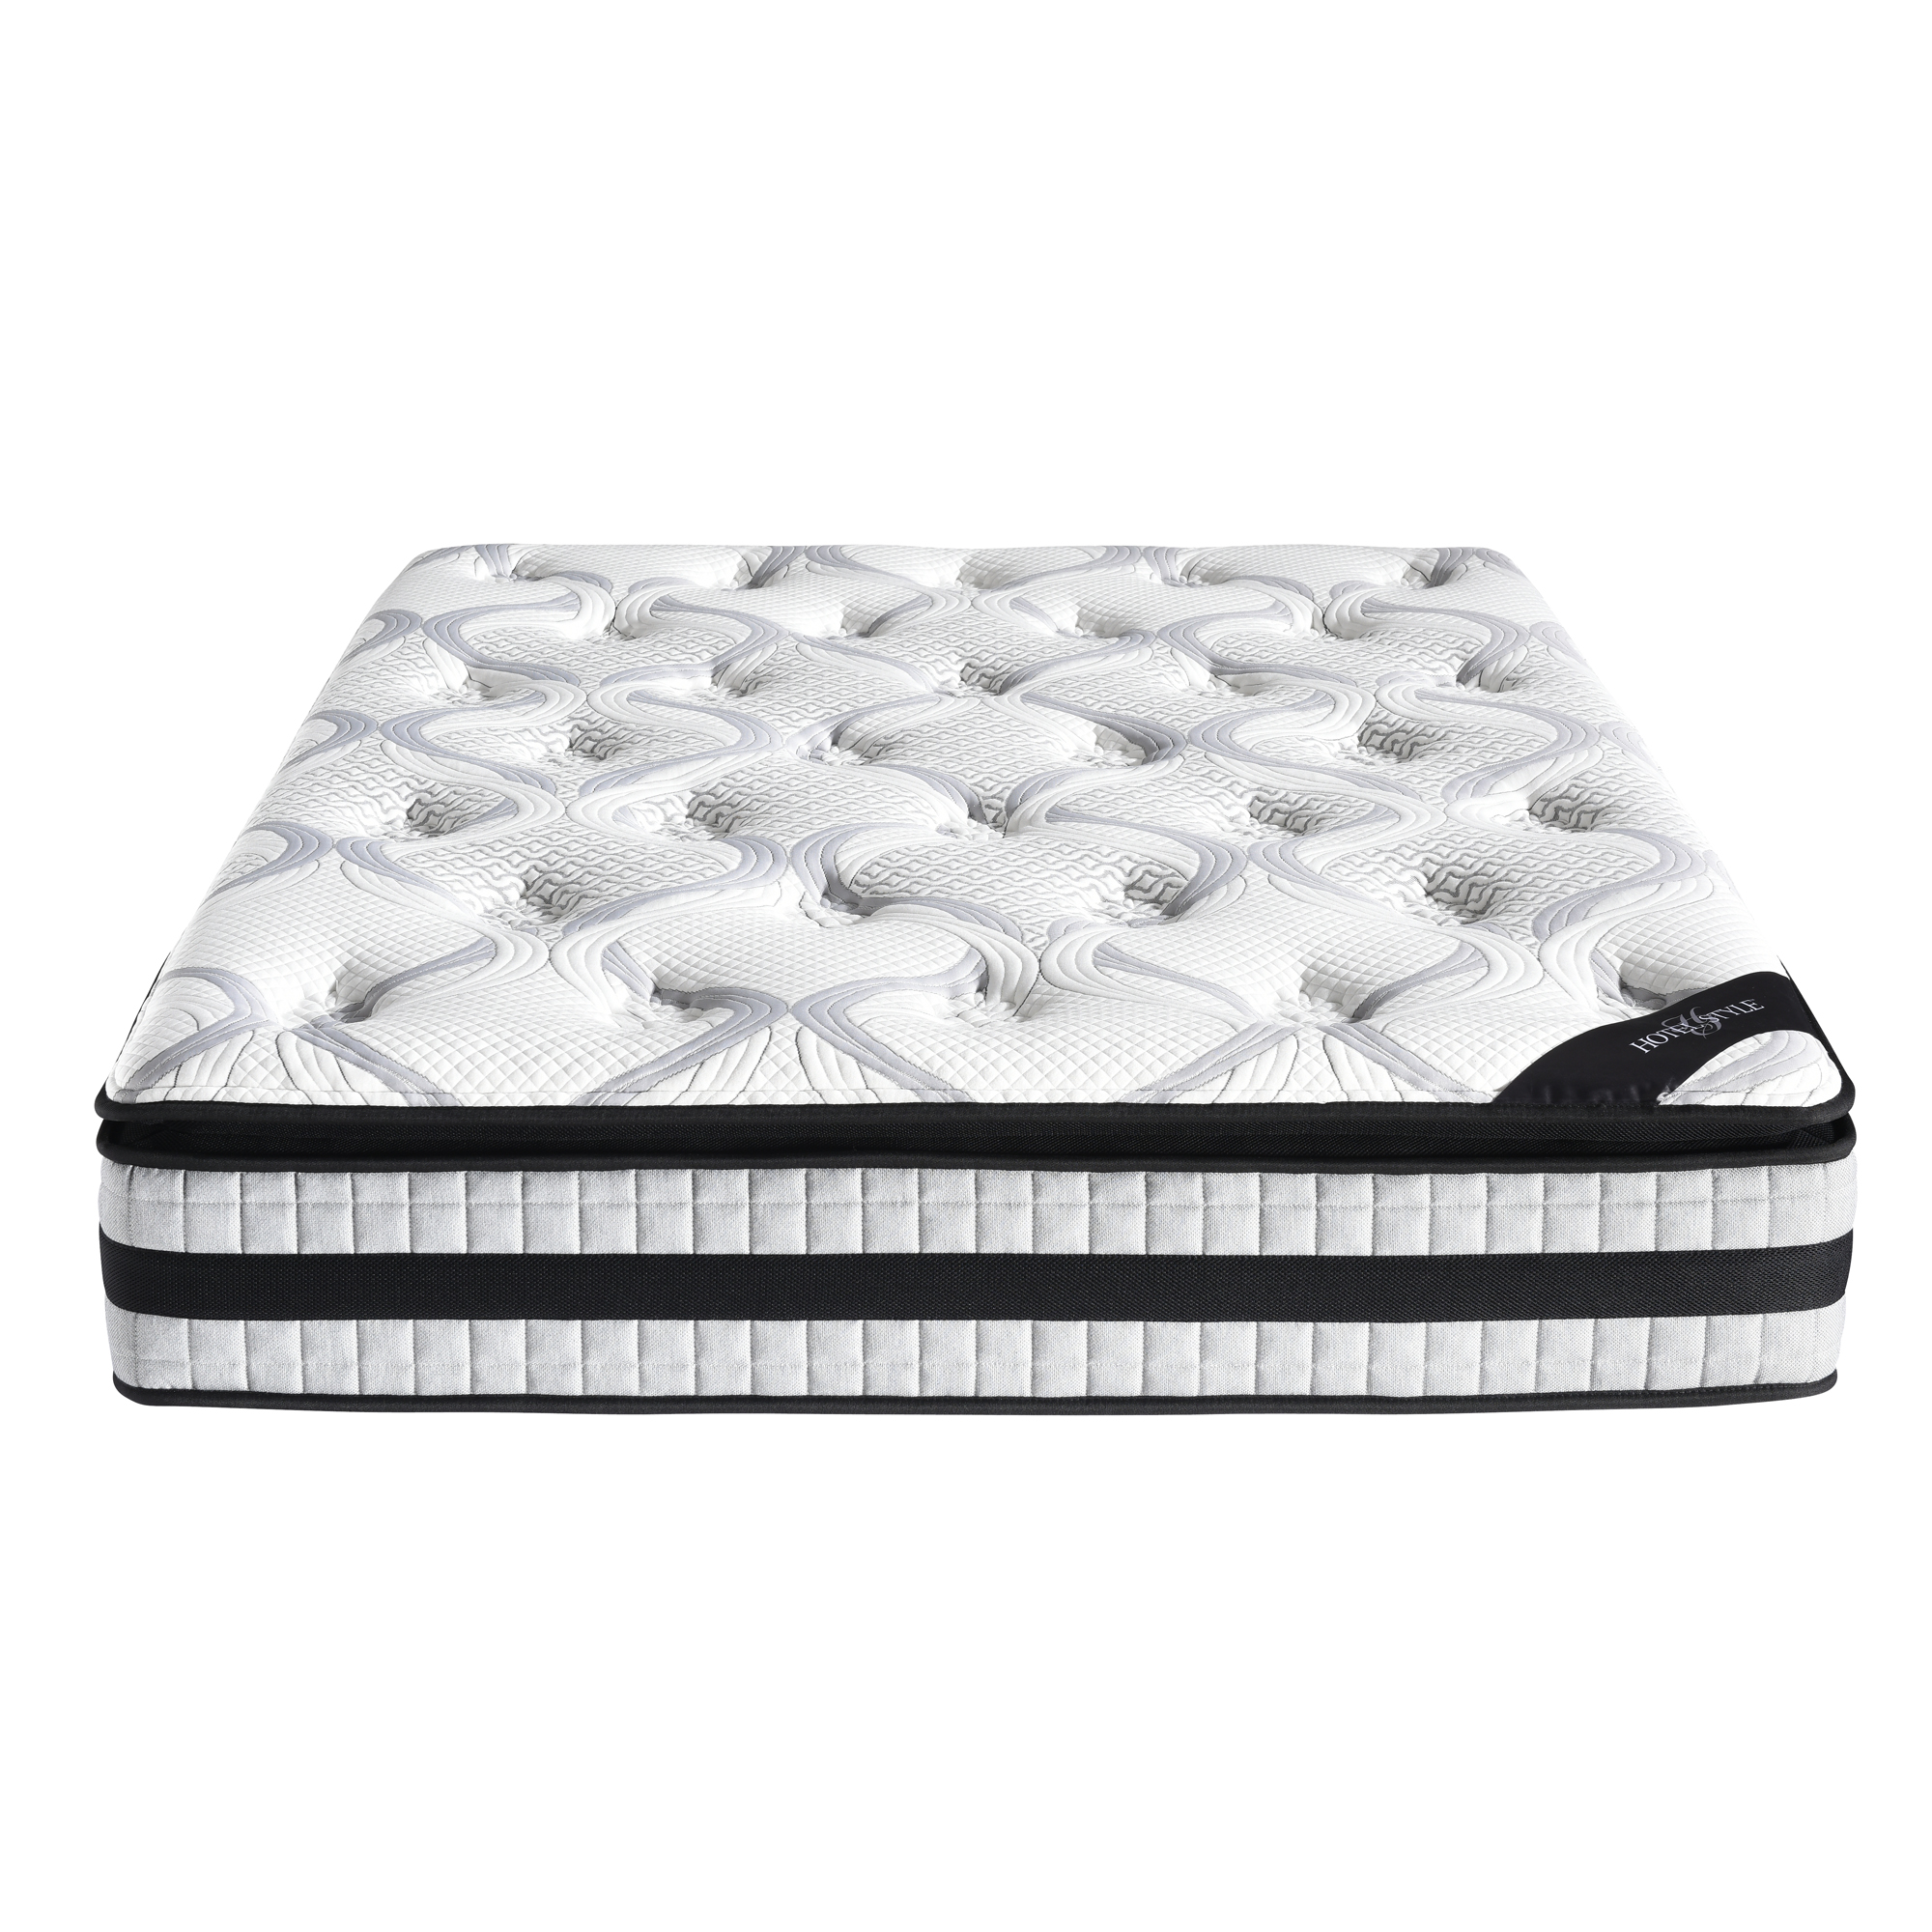 Revo12-Inch Plush Top Memory Foam and Individually Encased Spring Mattress - image 2 of 8